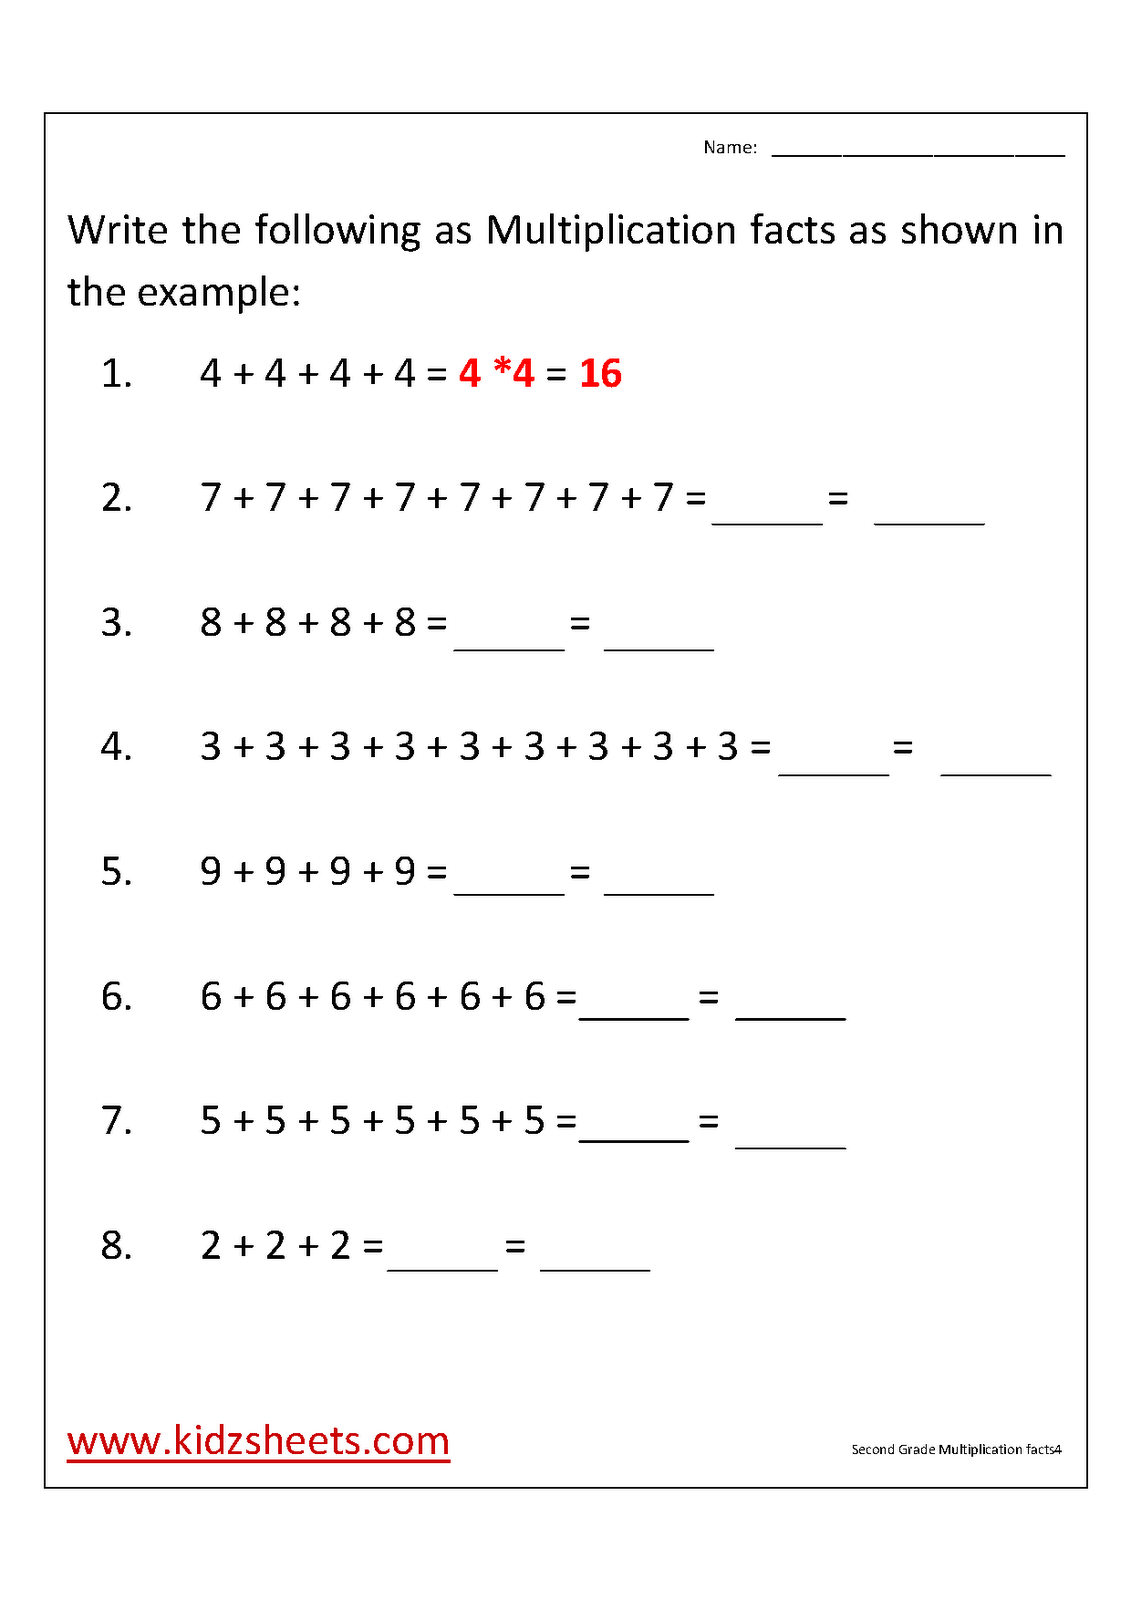 13-best-images-of-printable-multiplication-worksheets-4s-4-multiplication-worksheets